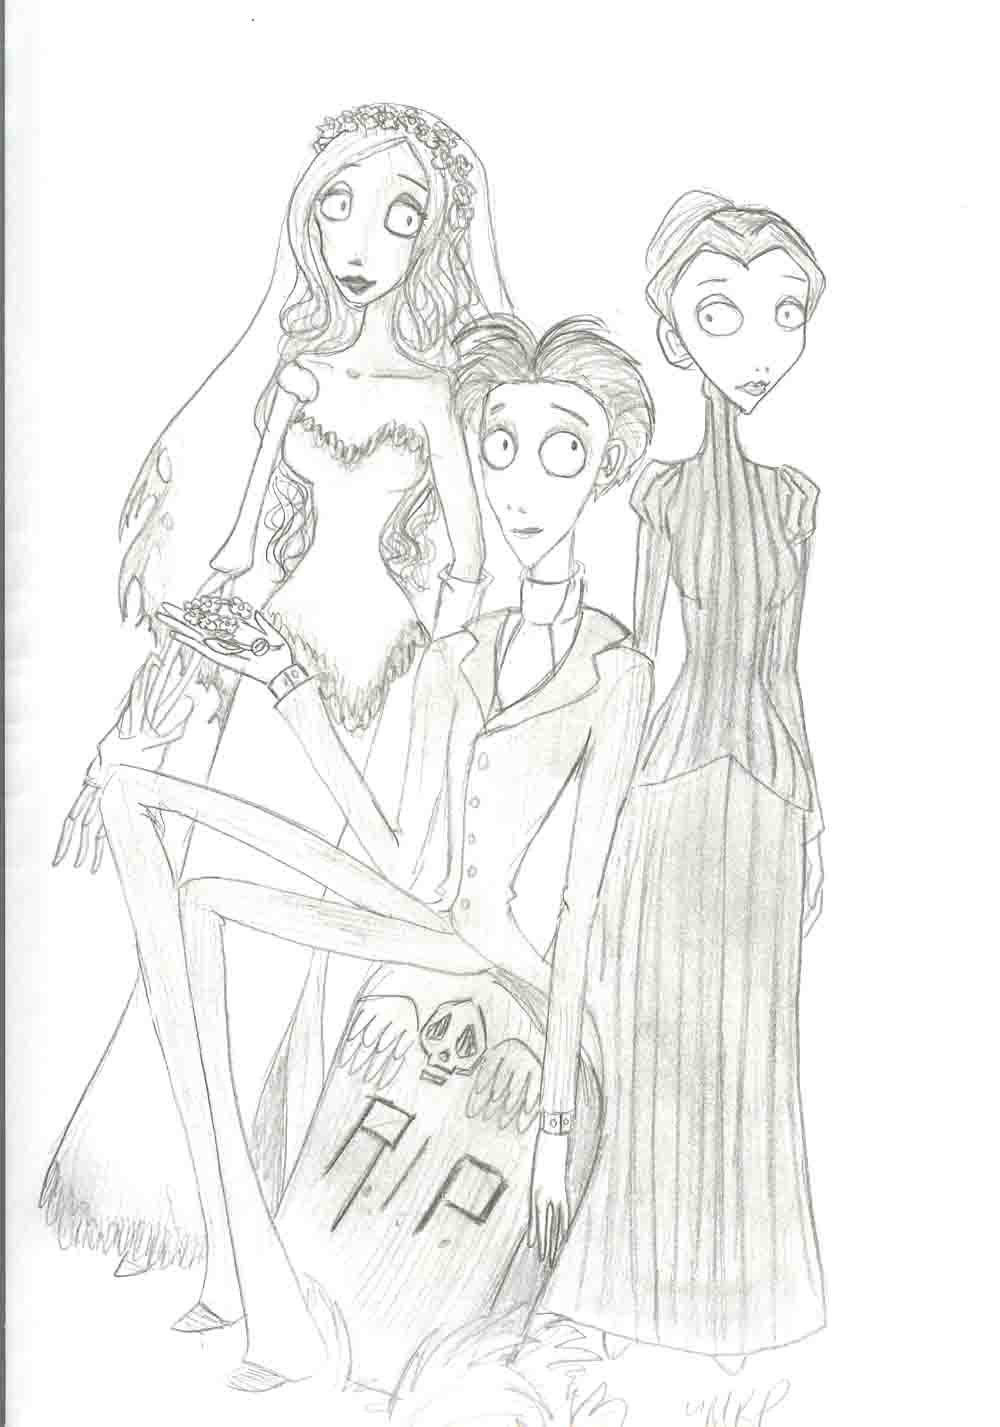 Corpse Bride Coloring Pages
 Corpse Bride by chalmaydisturbed on DeviantArt